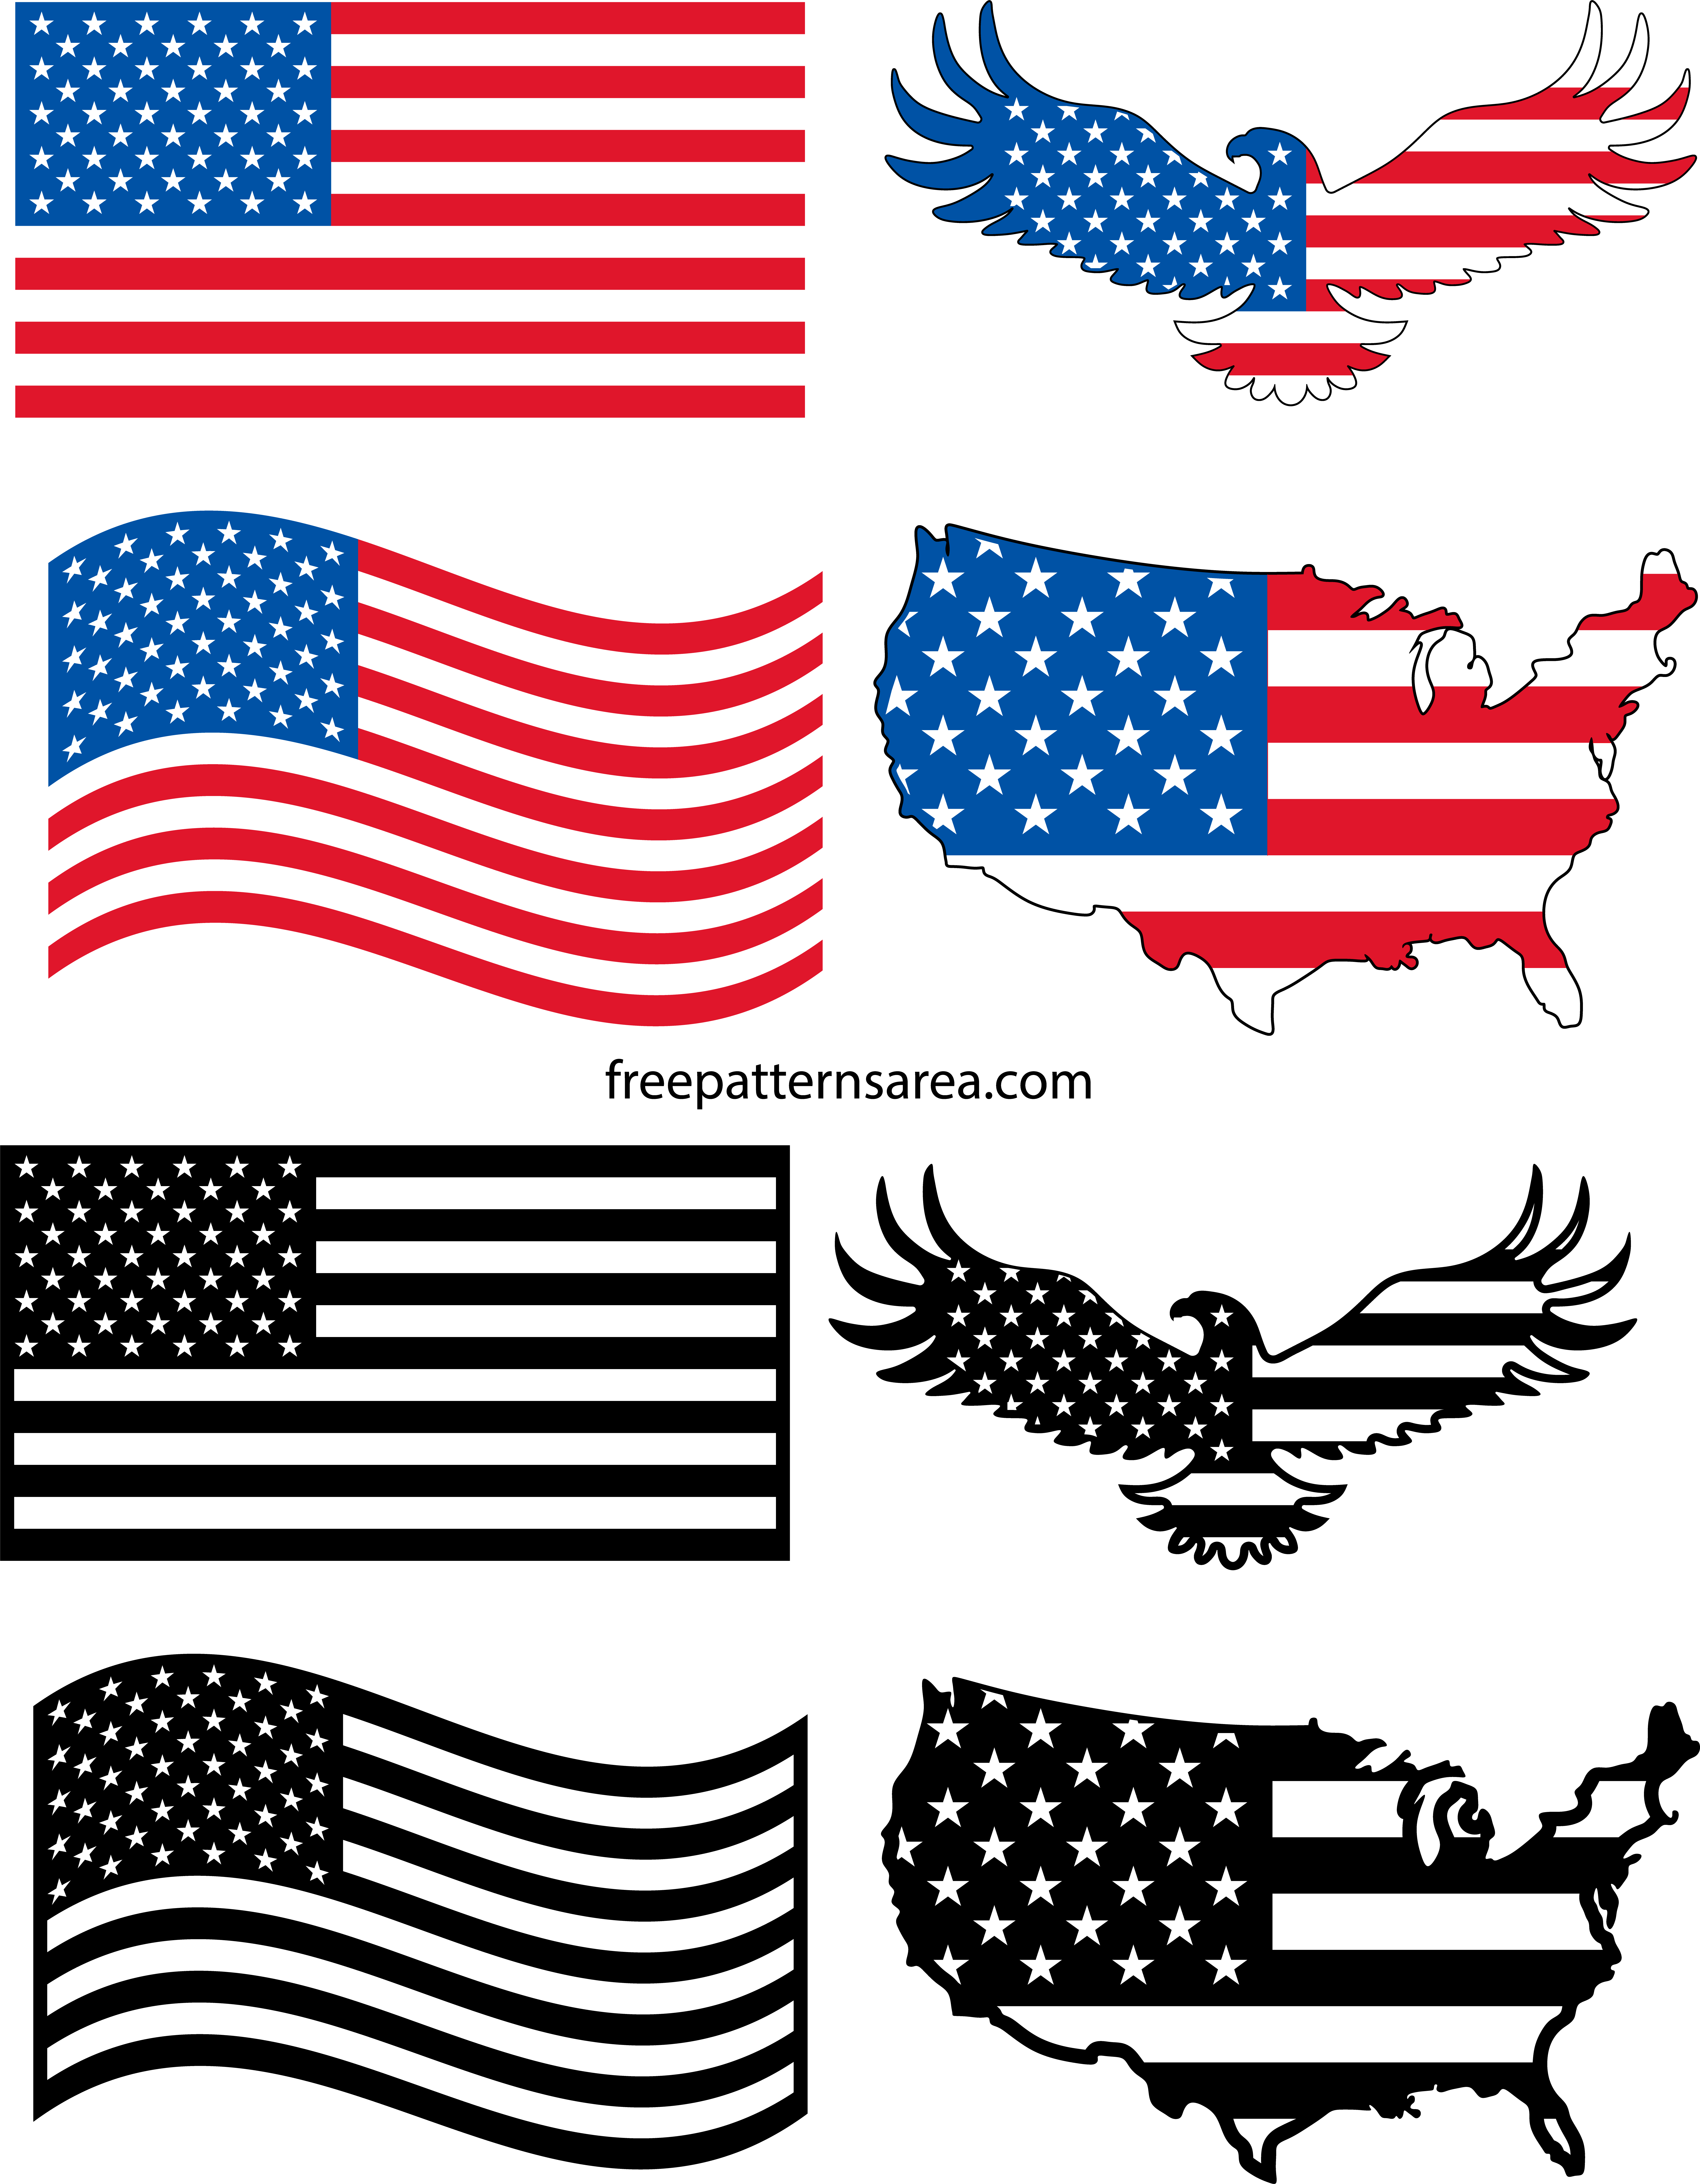 Usa United States American Flag Vector Images